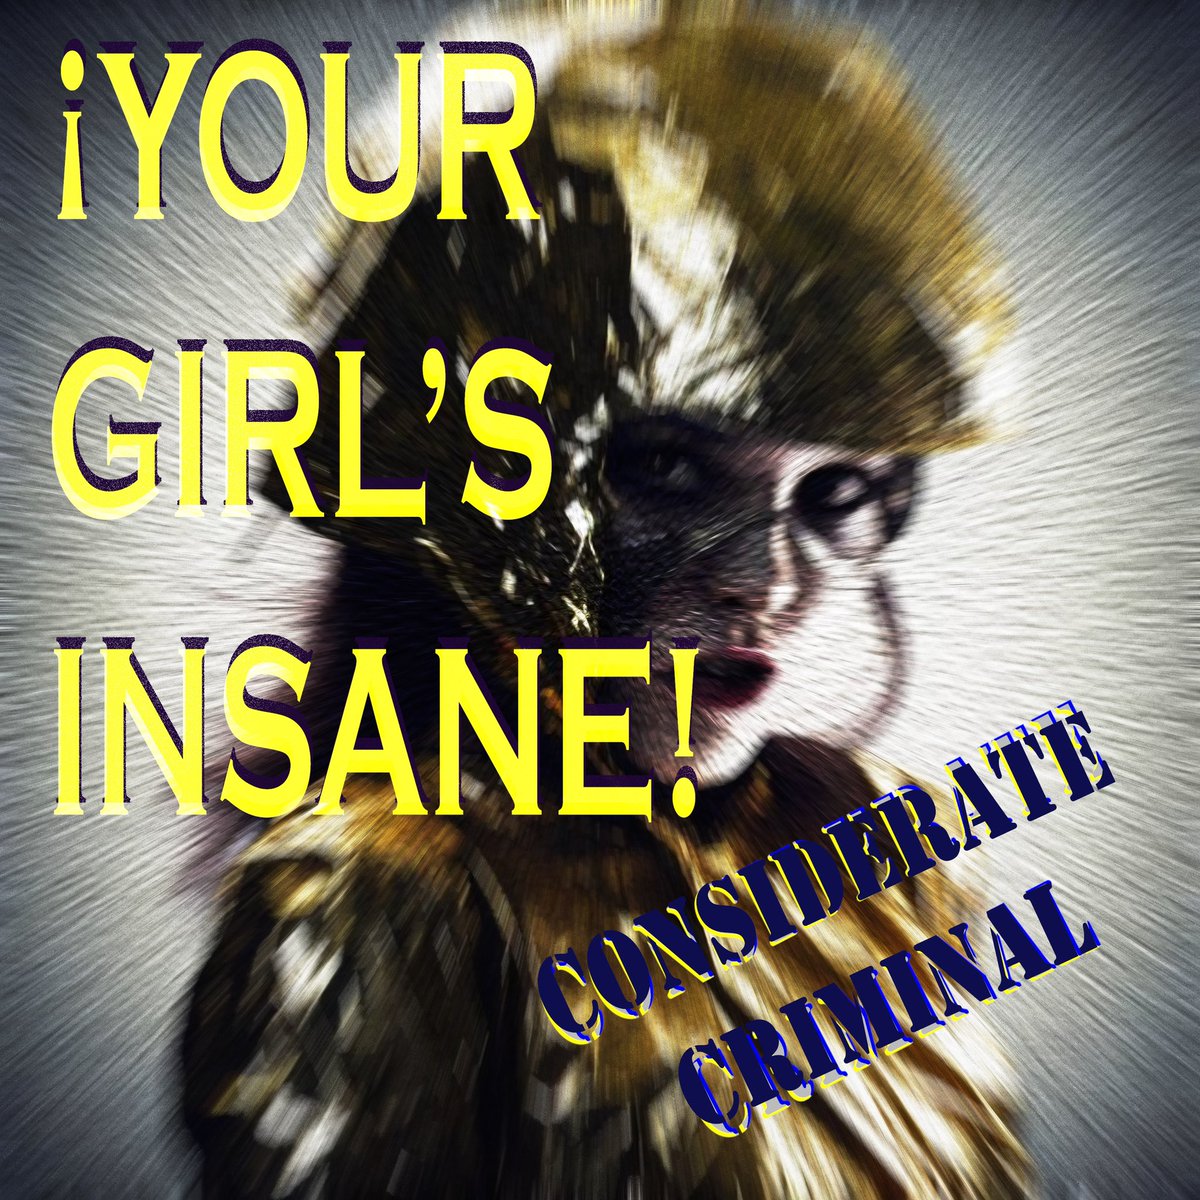 3 weeks on Friday (3 May), our new single, “Your Girl’s Insane” will be released. Check us out - Considerate Criminal - on any platform, including Spotify and YouTube. Spotify: open.spotify.com/artist/7LMb7F9… YouTube: youtube.com/channel/UCD41u…